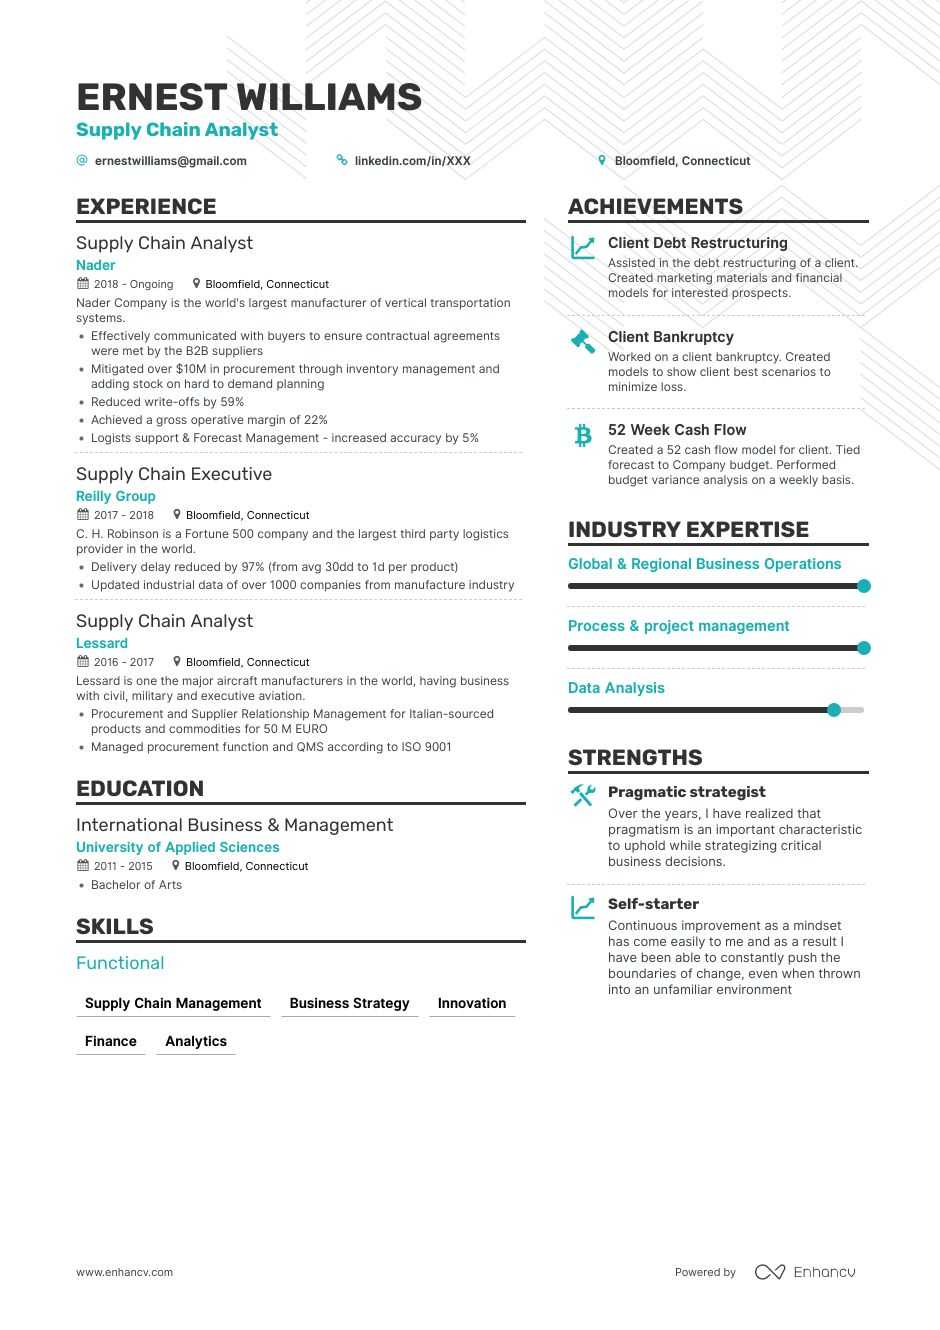 Supply Chain Analyst Resume: 8-Step Ultimate Guide for ...